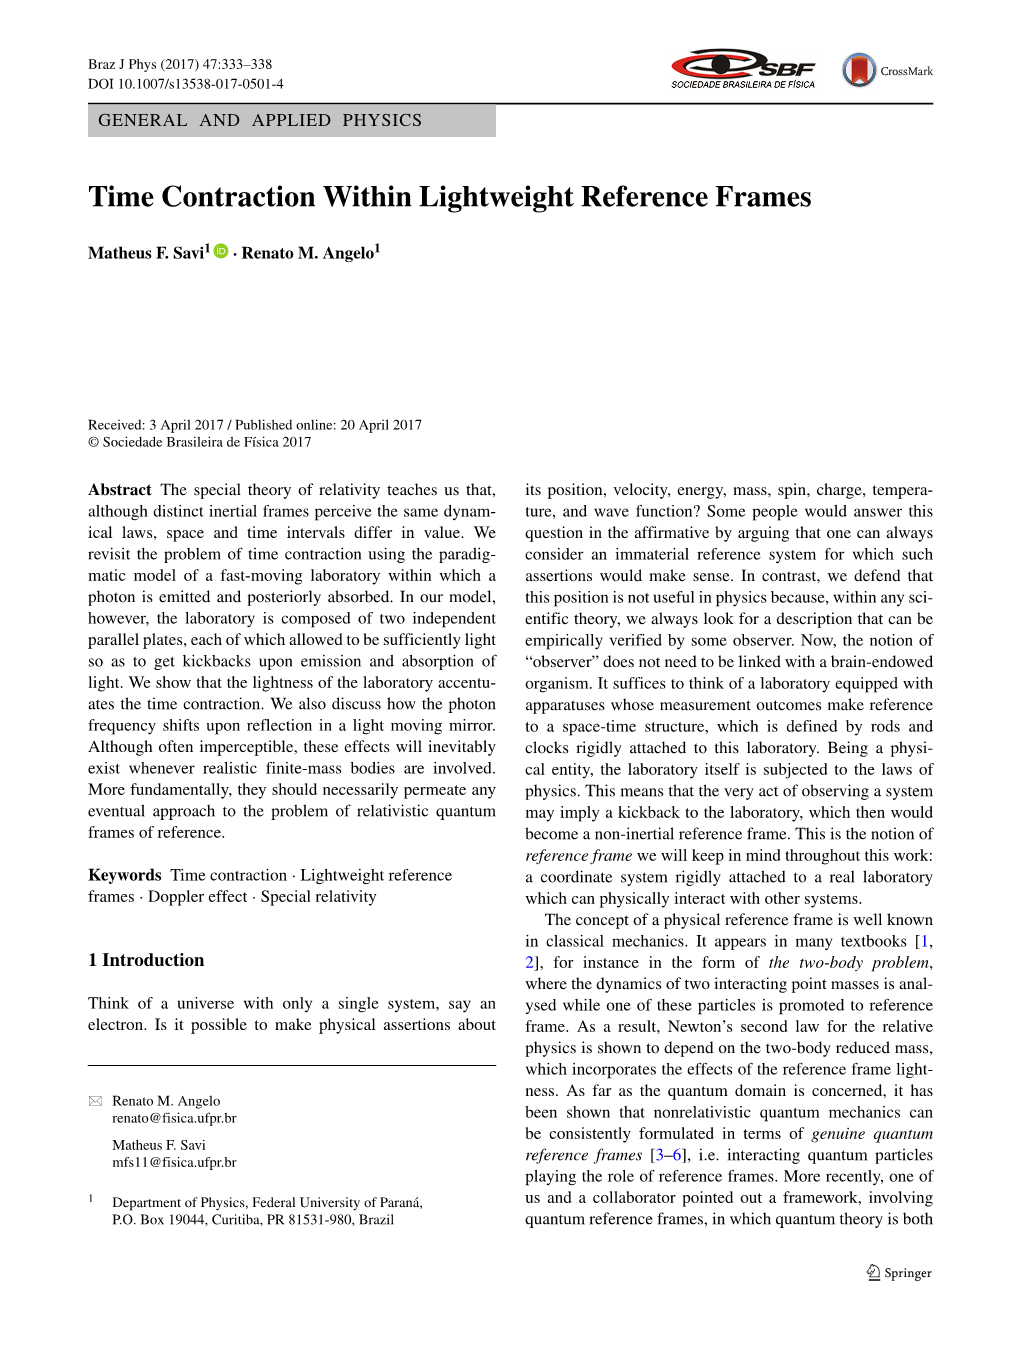 Time Contraction Within Lightweight Reference Frames